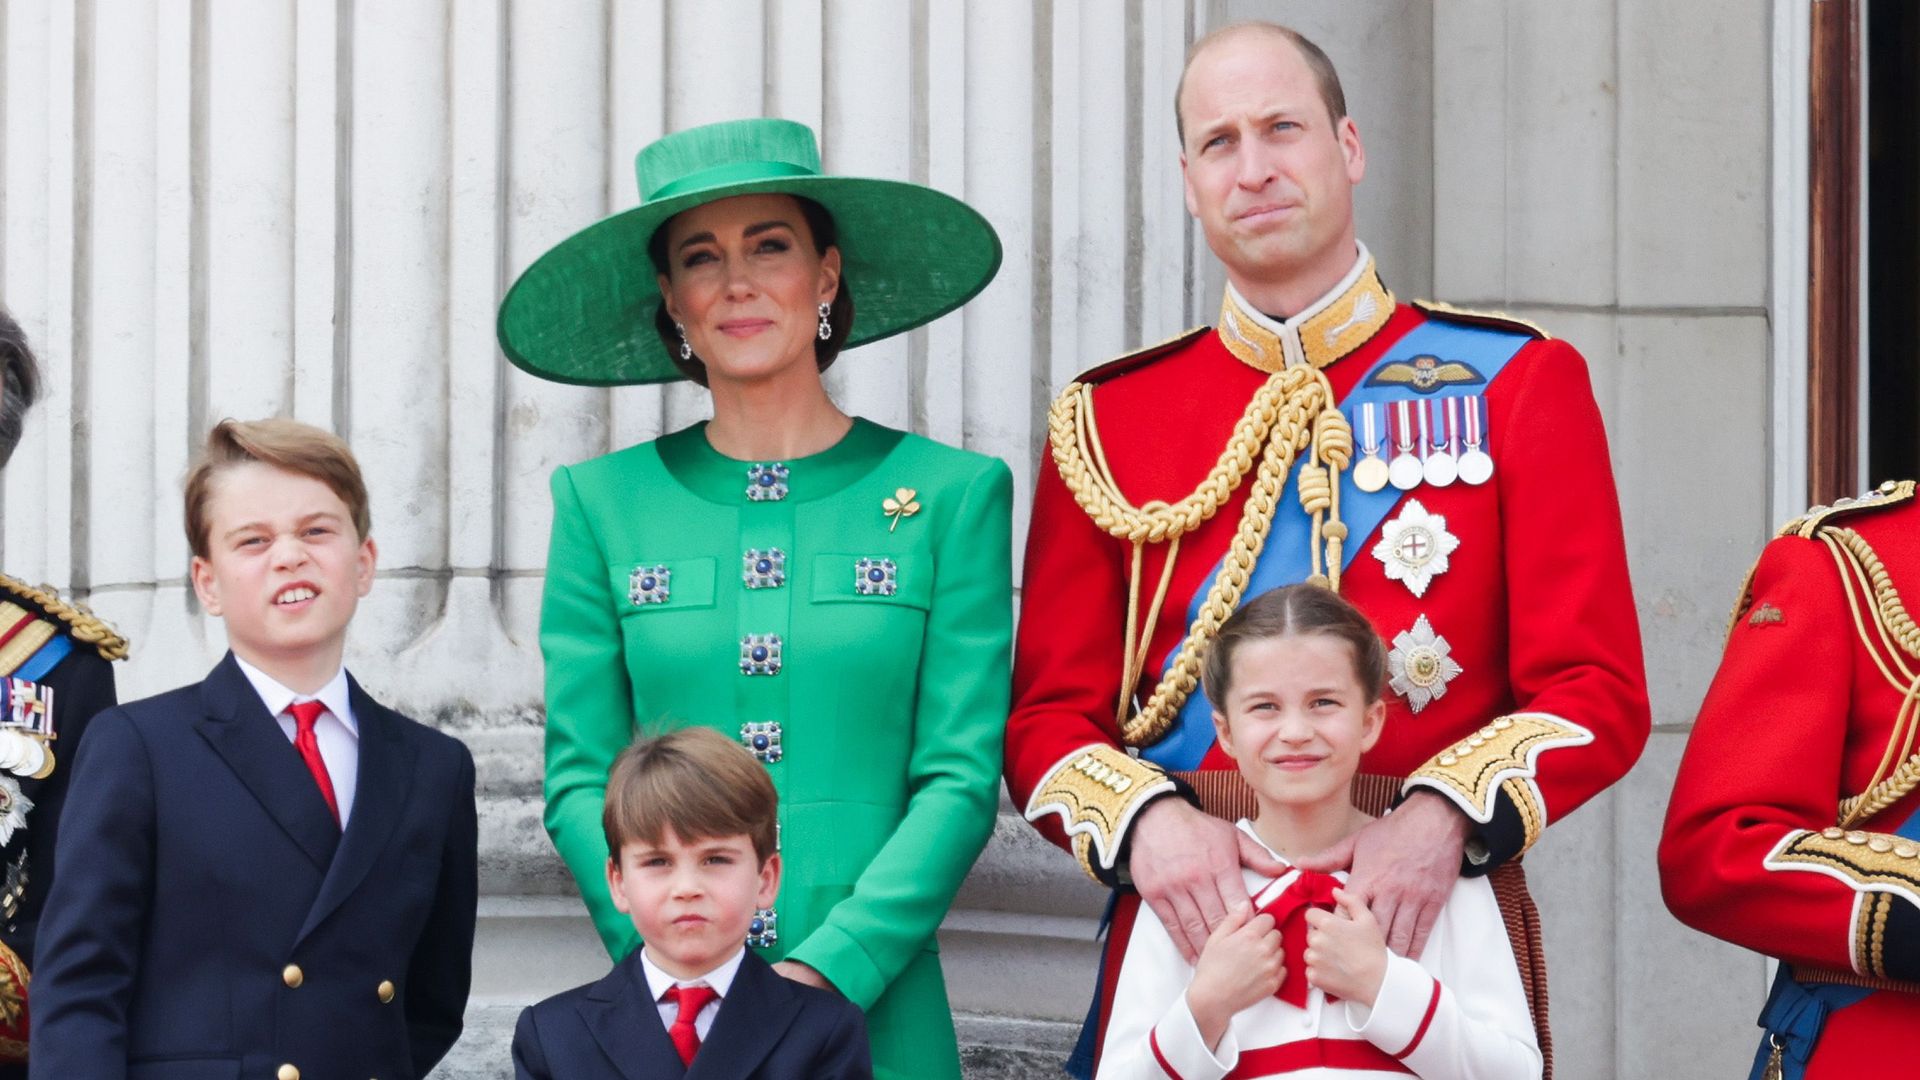 Prince William holds Princess Charlotte at Trooping the Colour